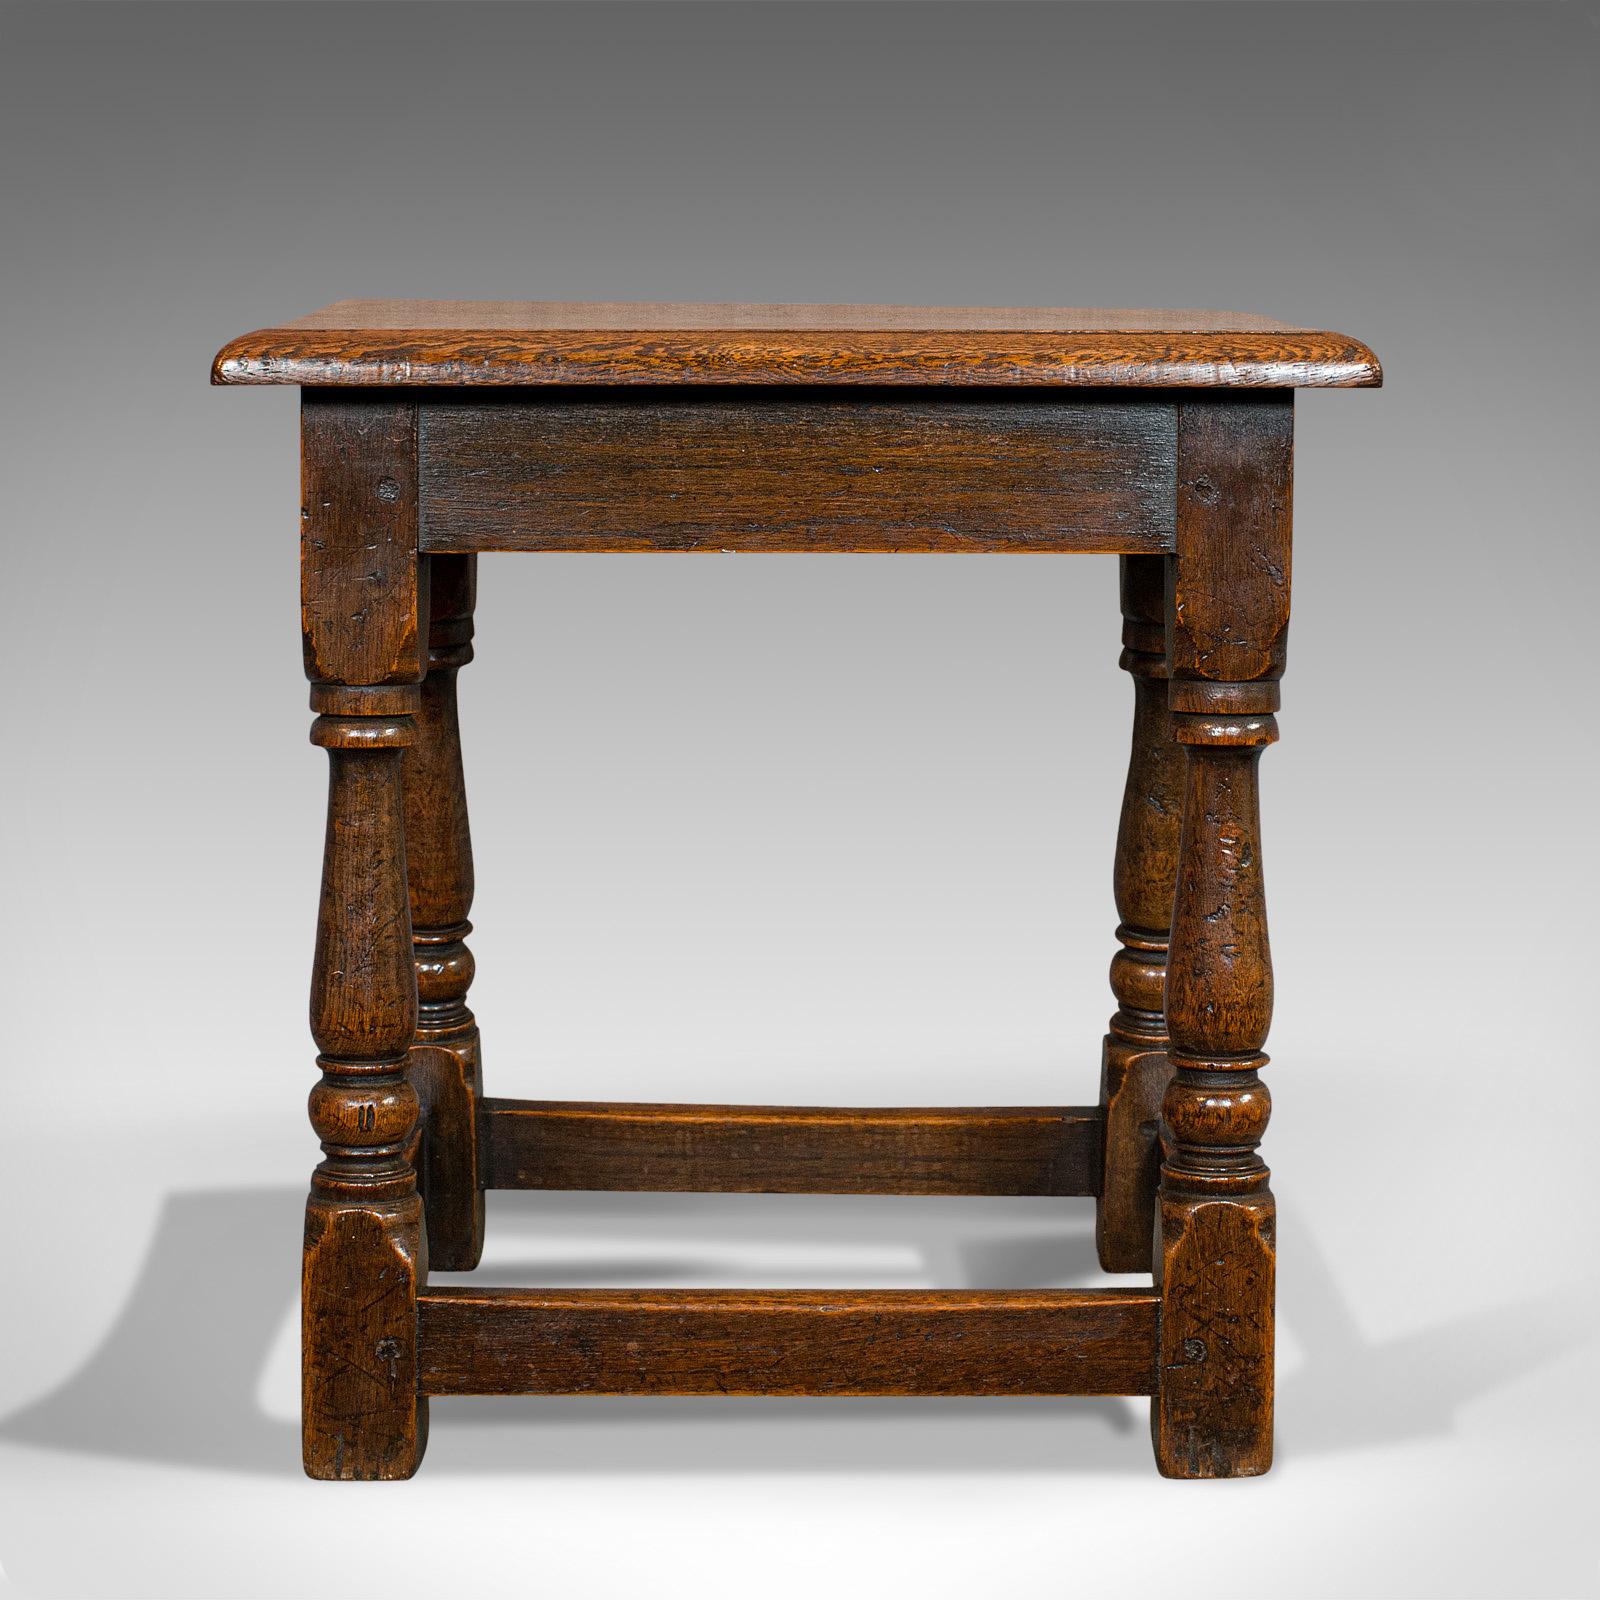 This is an antique tea table. An English, oak joint stool coffee table dating to the Victorian period, circa 1900.

Appealing, small tea table
Displays a desirable aged patina
Select oak with fine grain interest
Deep caramel hues to the wax